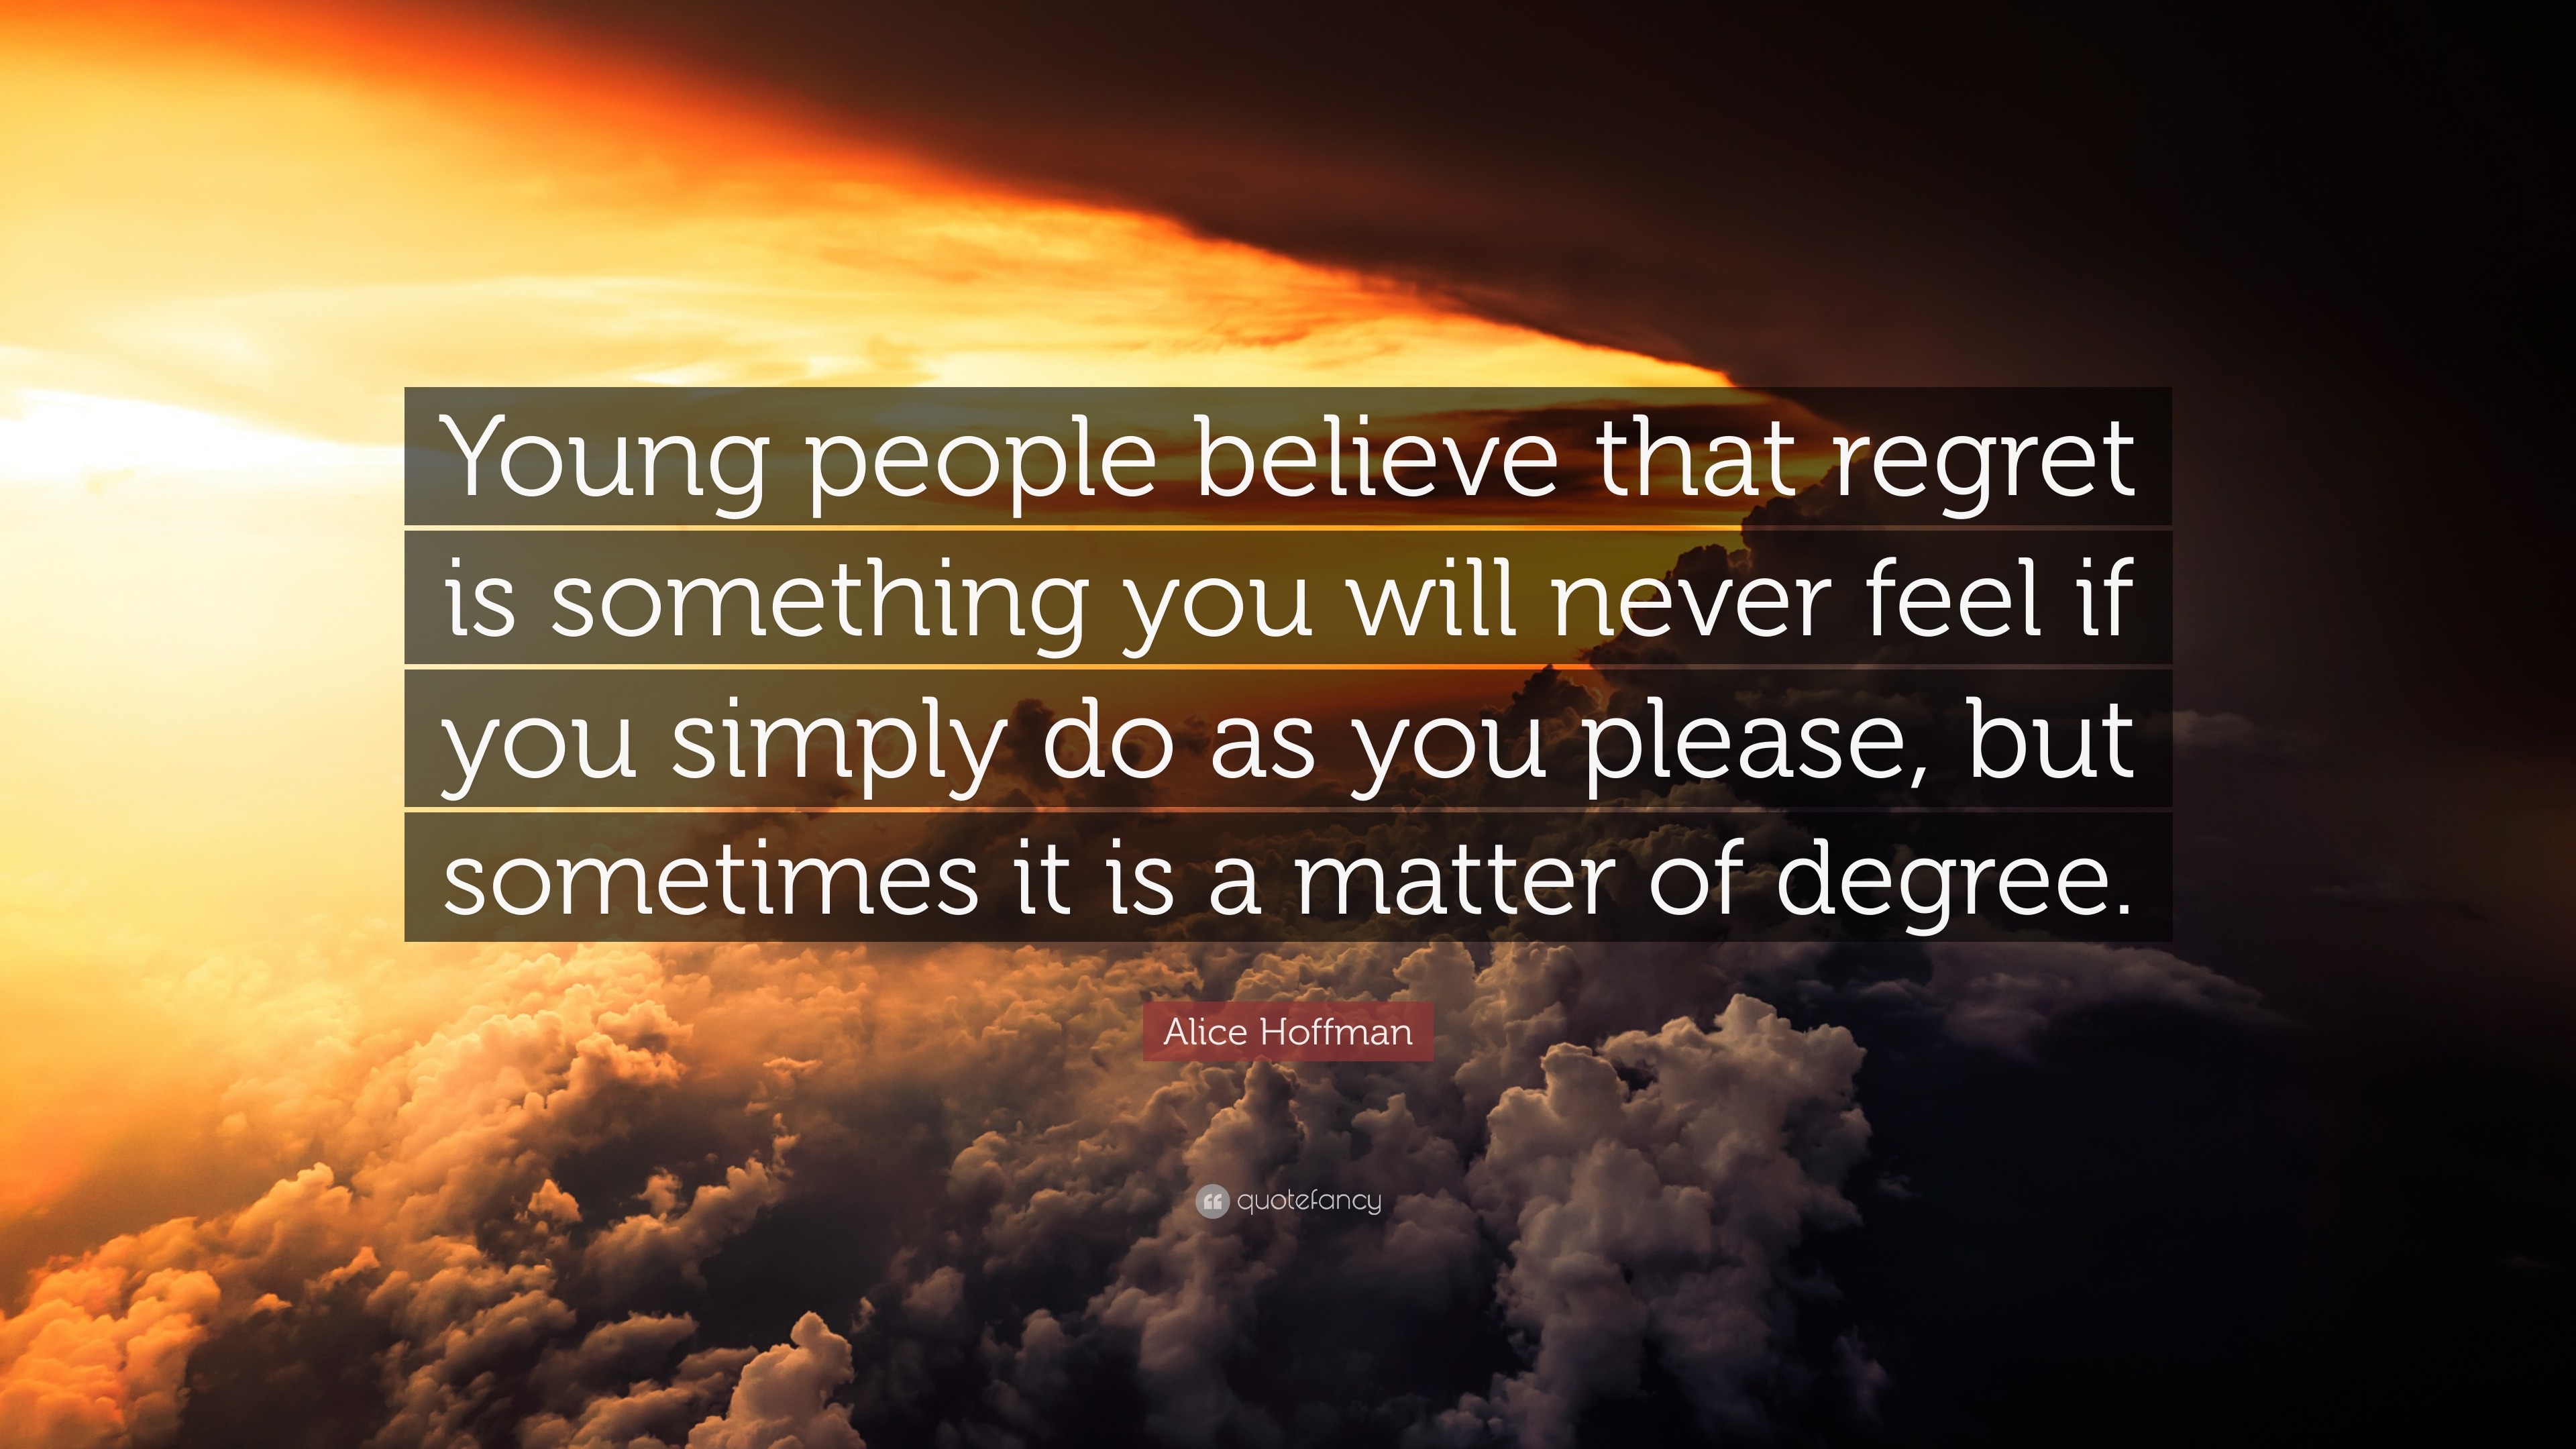 Alice Hoffman Quote “Young people believe that regret is